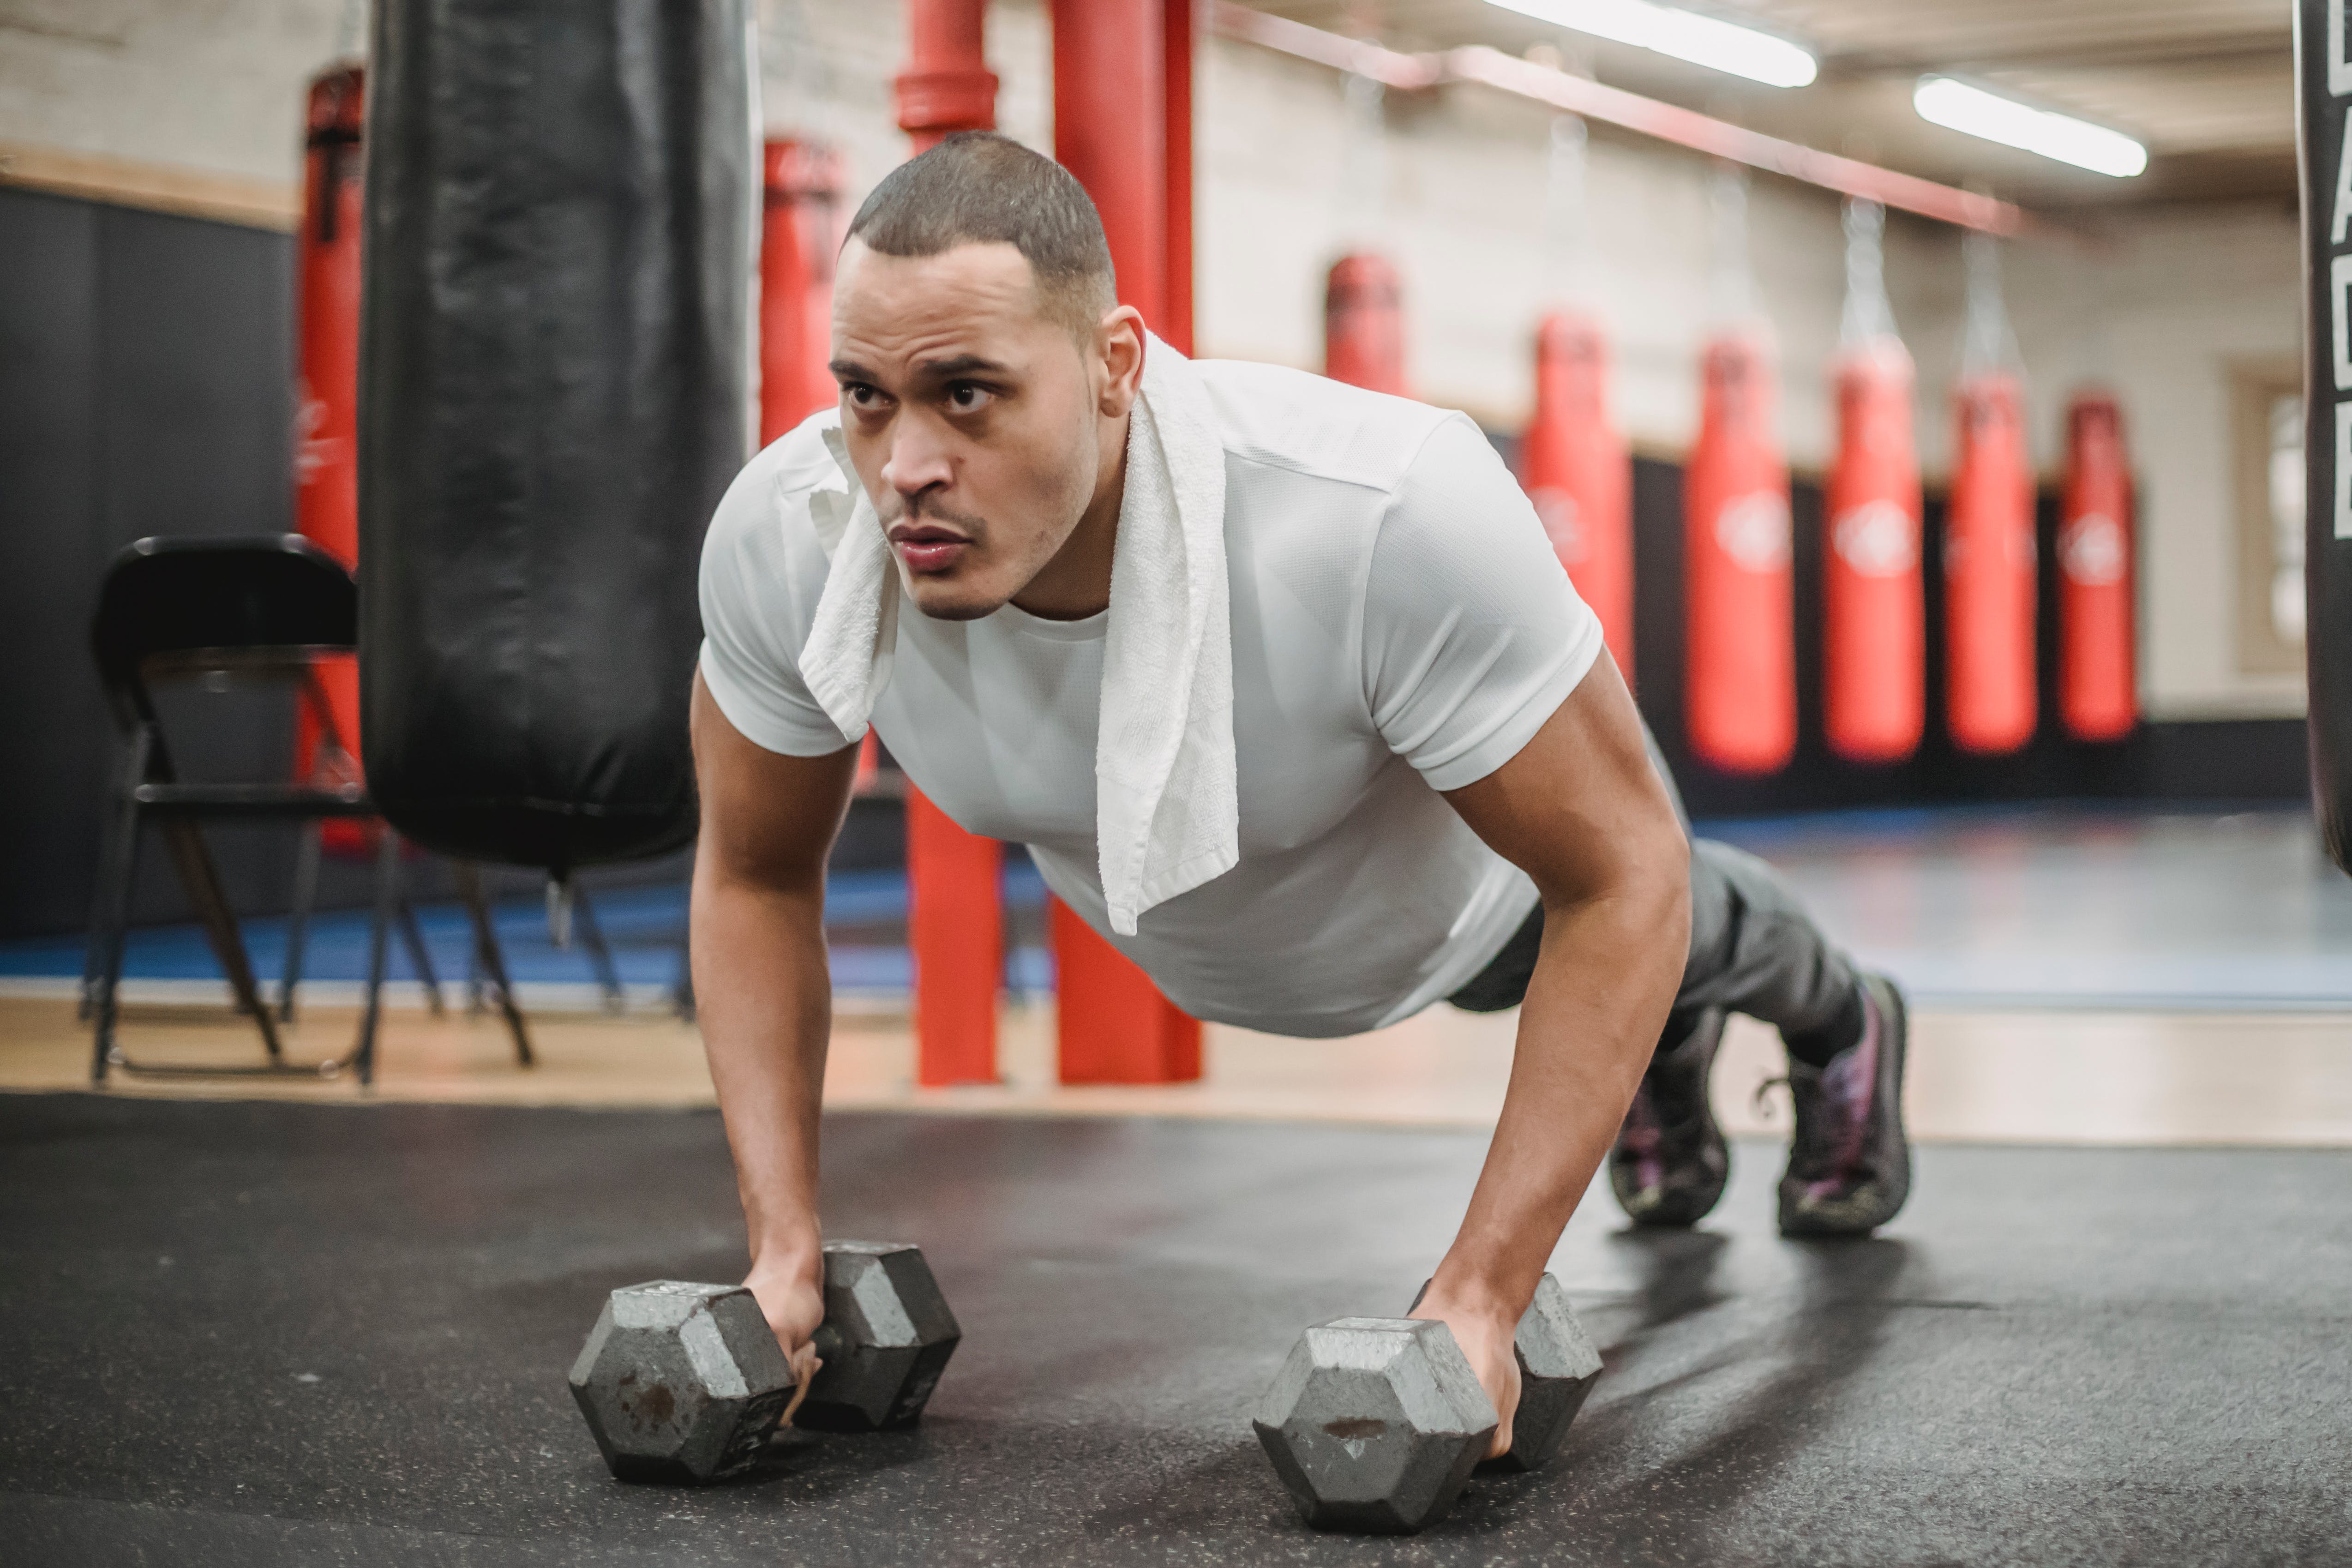 A man doing push ups with dumbbells